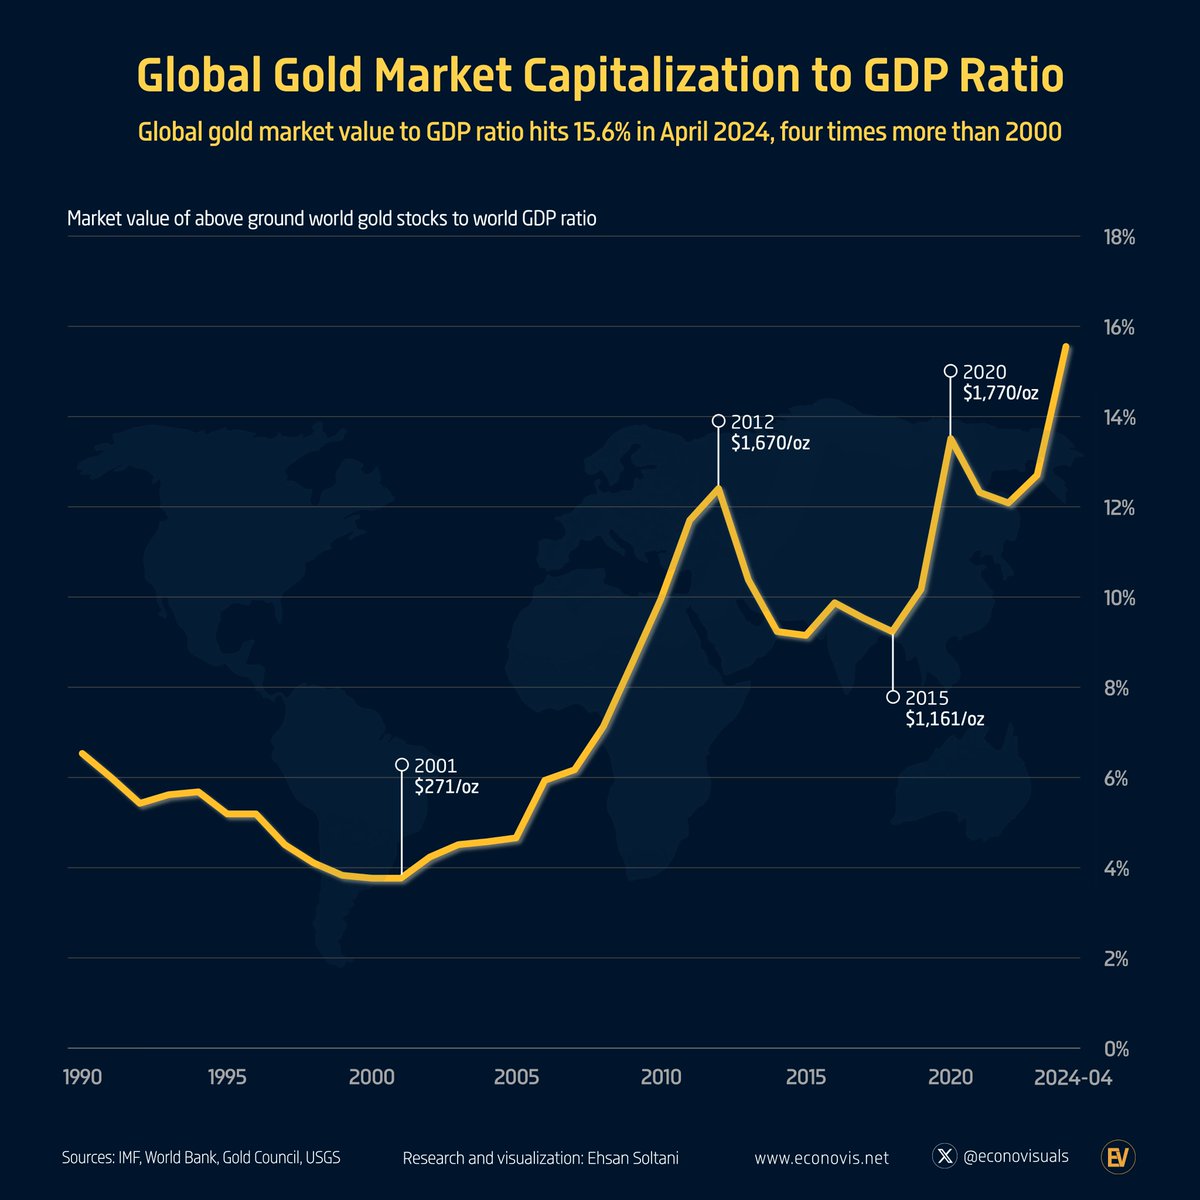 📈 Global Gold Market Capitalization to GDP Ratio
Market value of above ground world gold stocks to world GDP ratio hits 15.6% in April 2024

#gold #economy #GDP #market #Bullion #GoldETF #GoldMarket #goldprices #goldinvestment #spx #stocks #equity #bitcoin #silver #XAUUSD #Risk